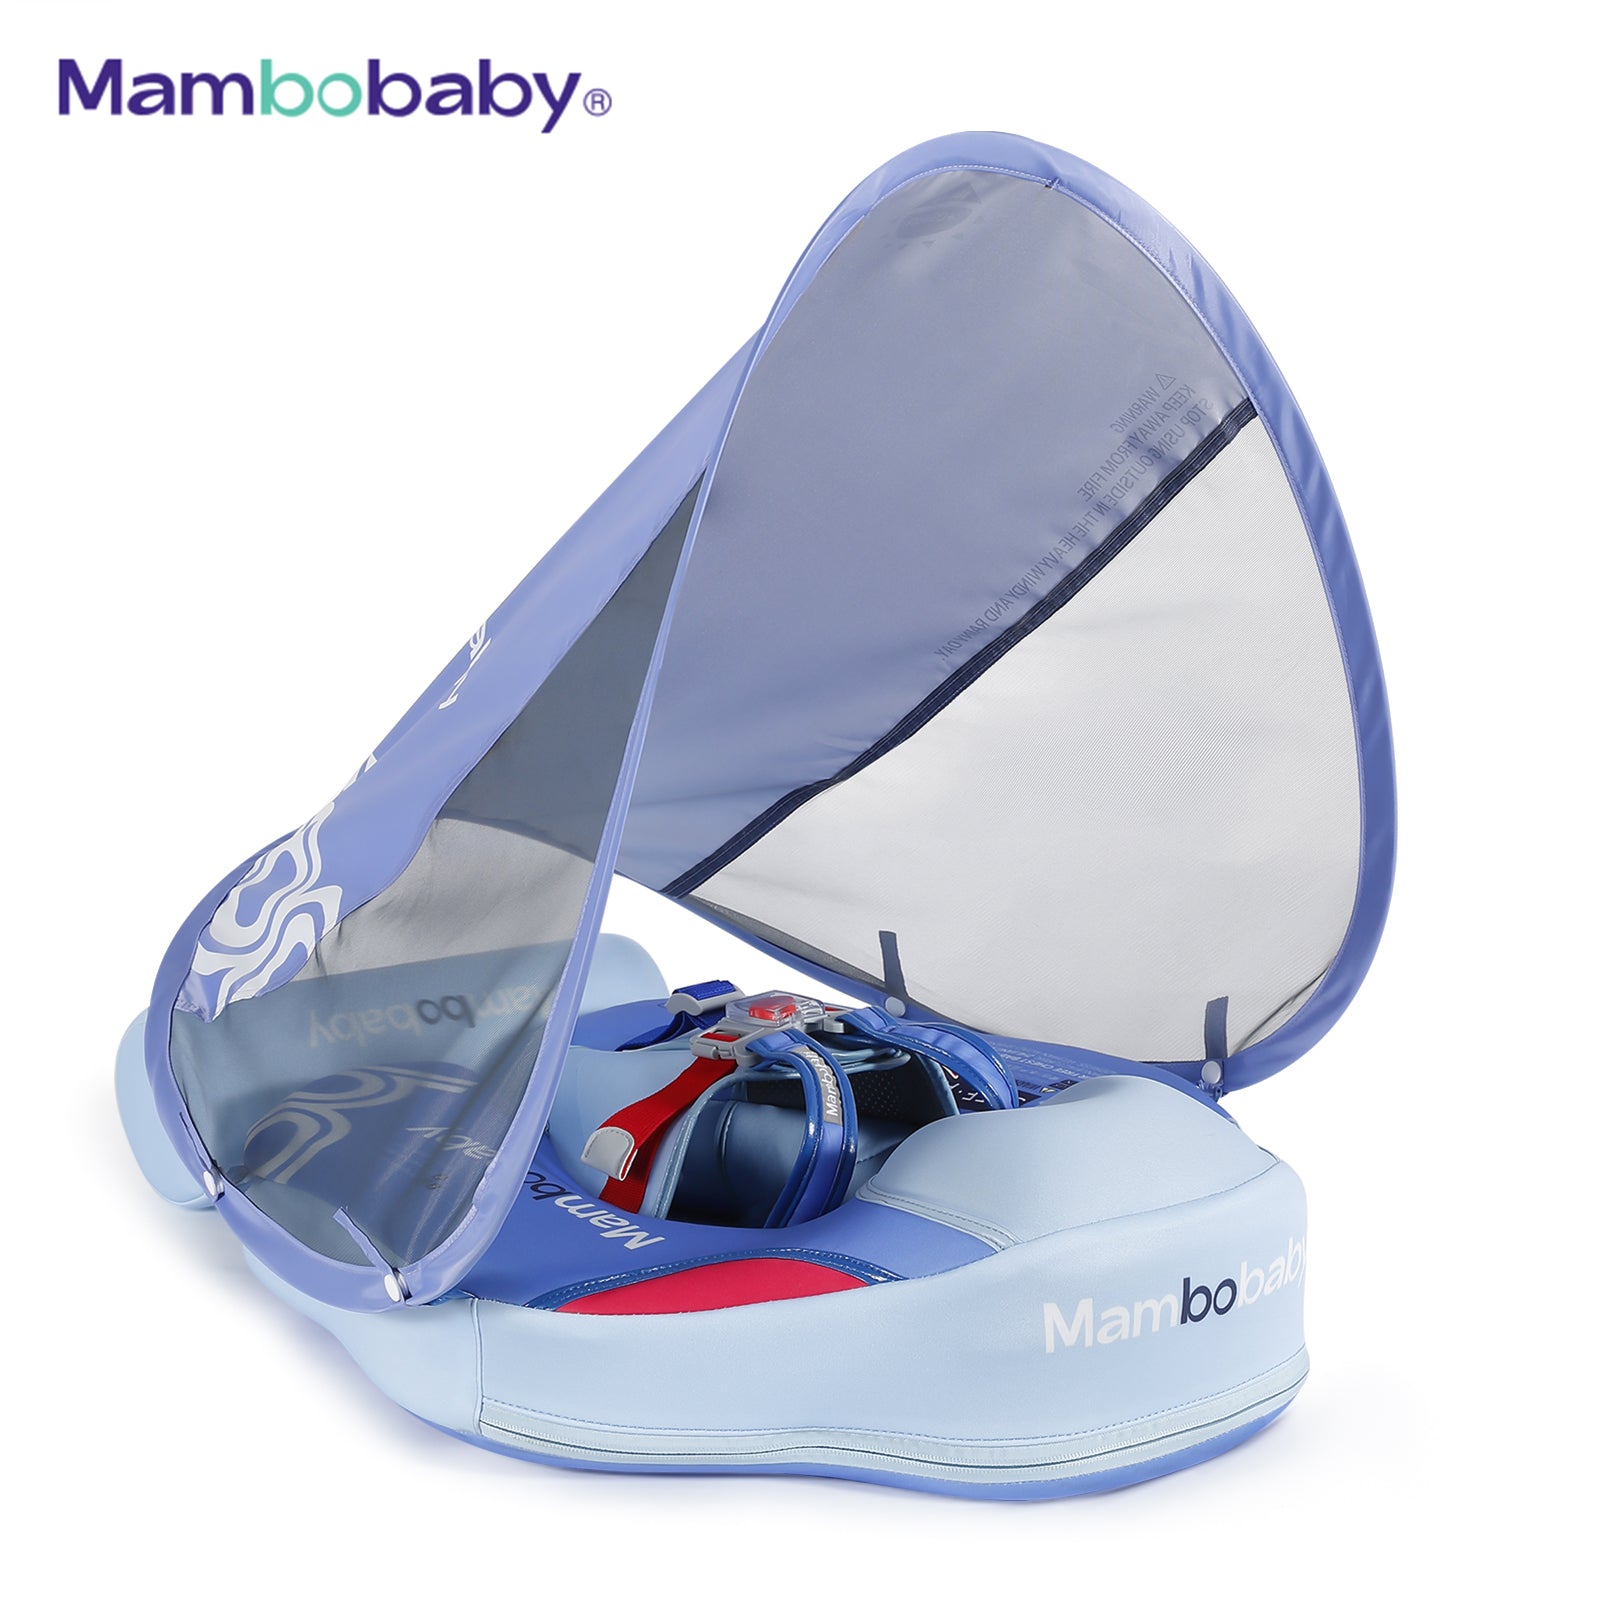 MamboBaby FloatBuddy - APE'S HUT - Sky Blue with umbrella & tail